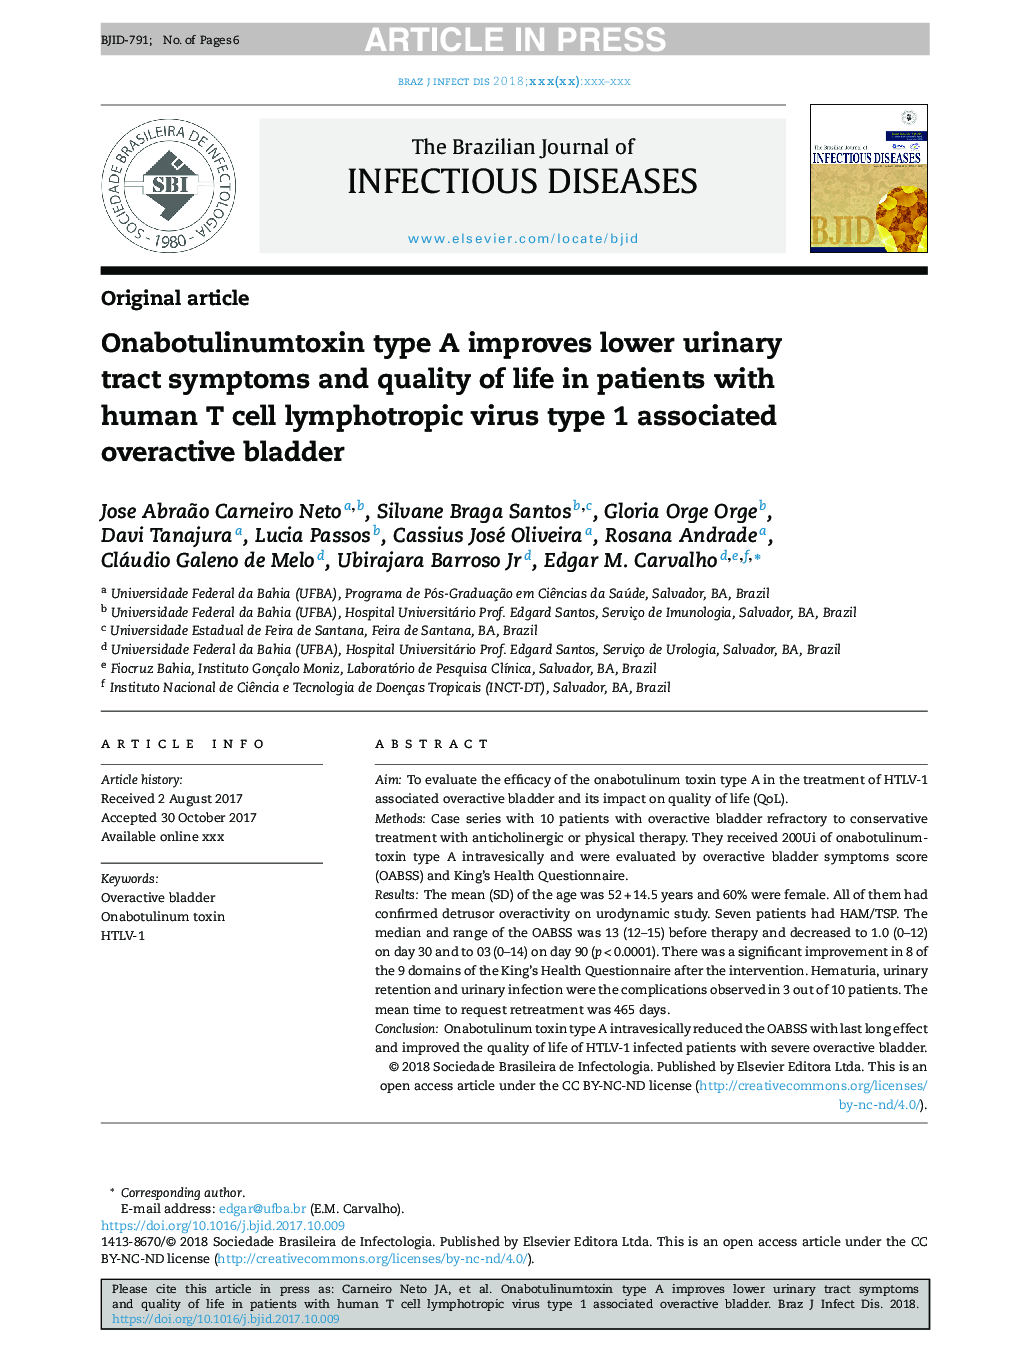 Onabotulinumtoxin type A improves lower urinary tract symptoms and quality of life in patients with human T cell lymphotropic virus type 1 associated overactive bladder